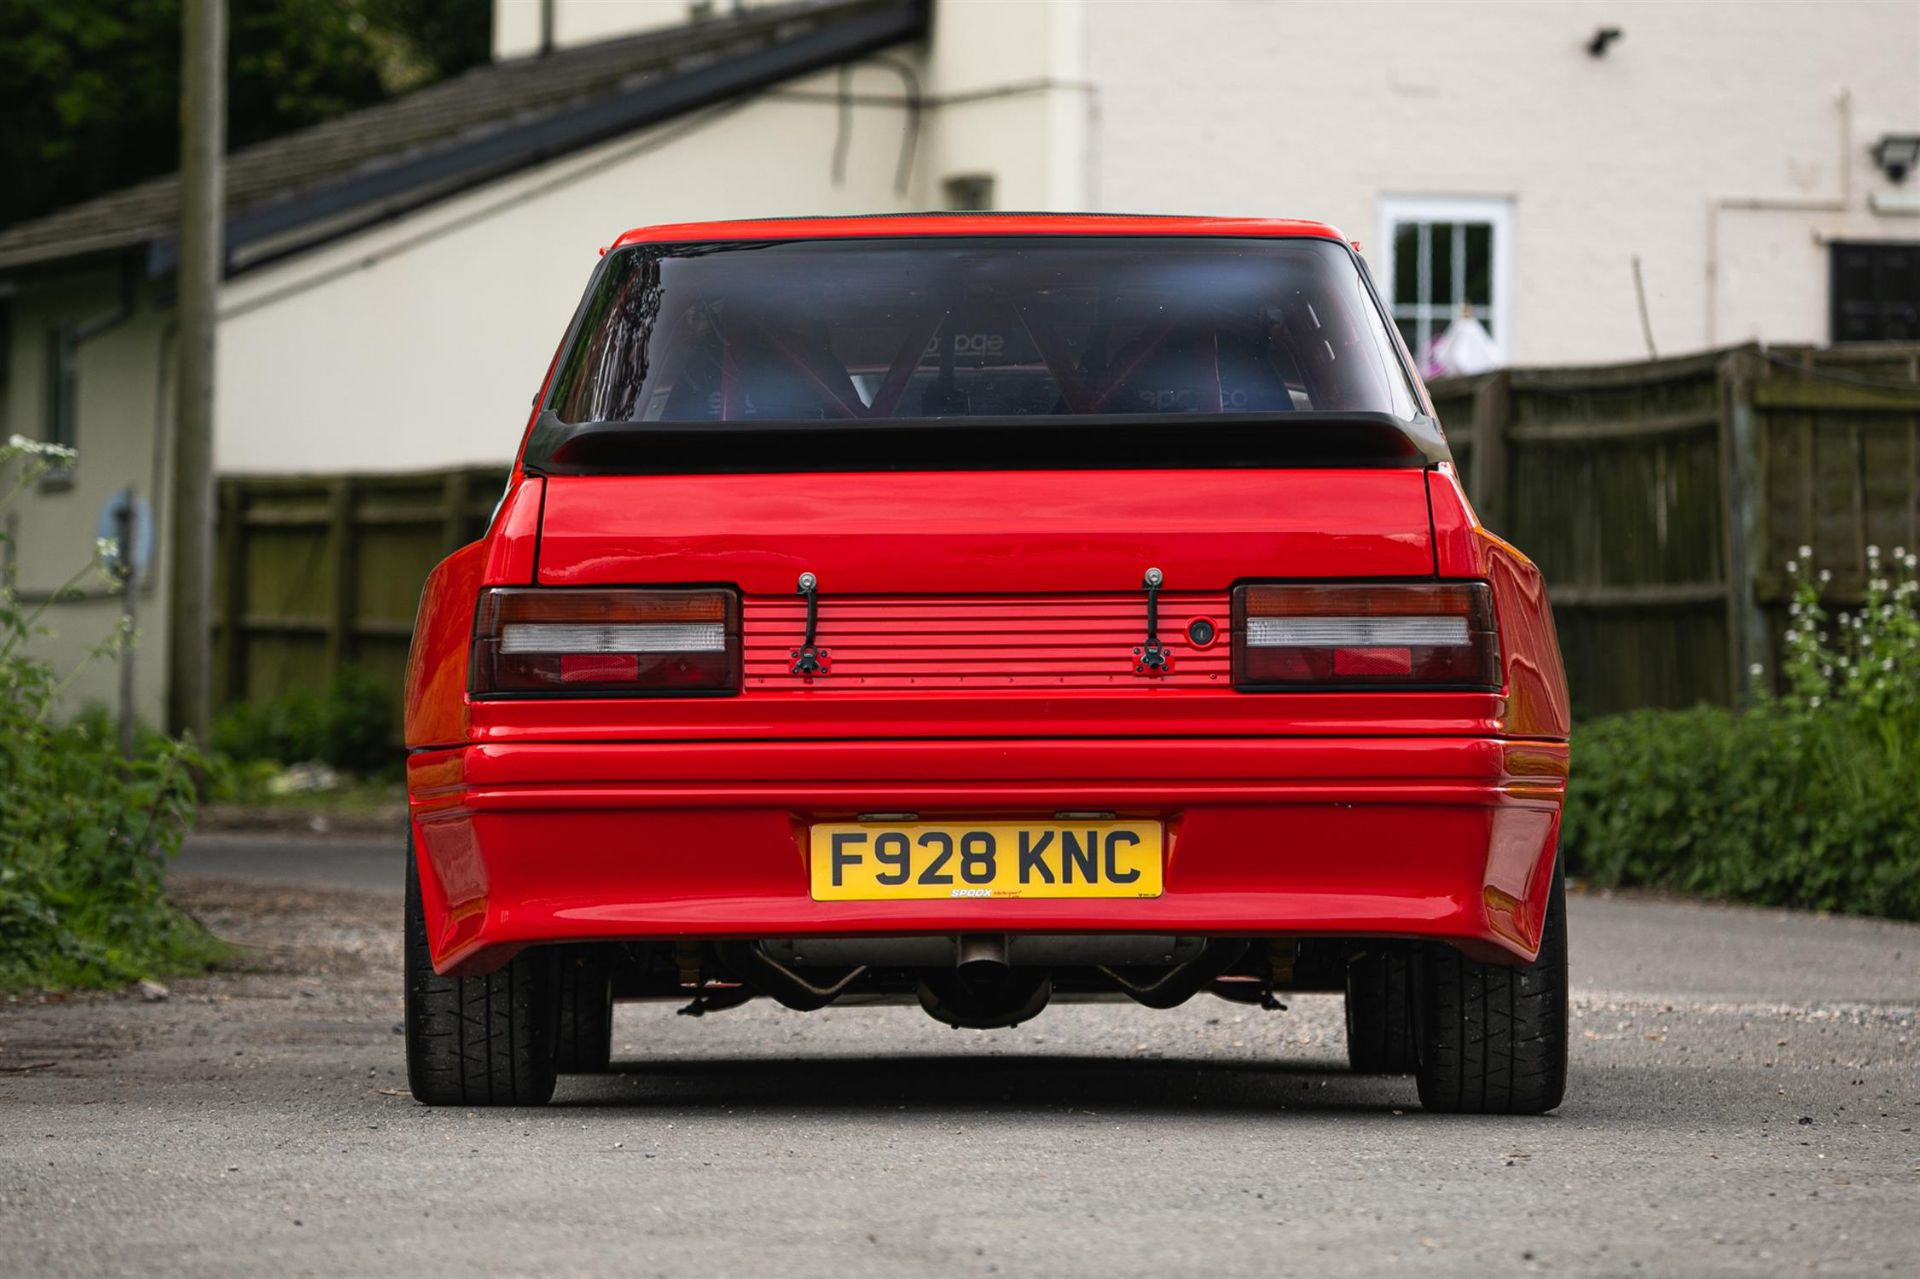 1988 Peugeot 309 GTi 16v Supercharged 'Maxi' Rally Special - Image 7 of 10